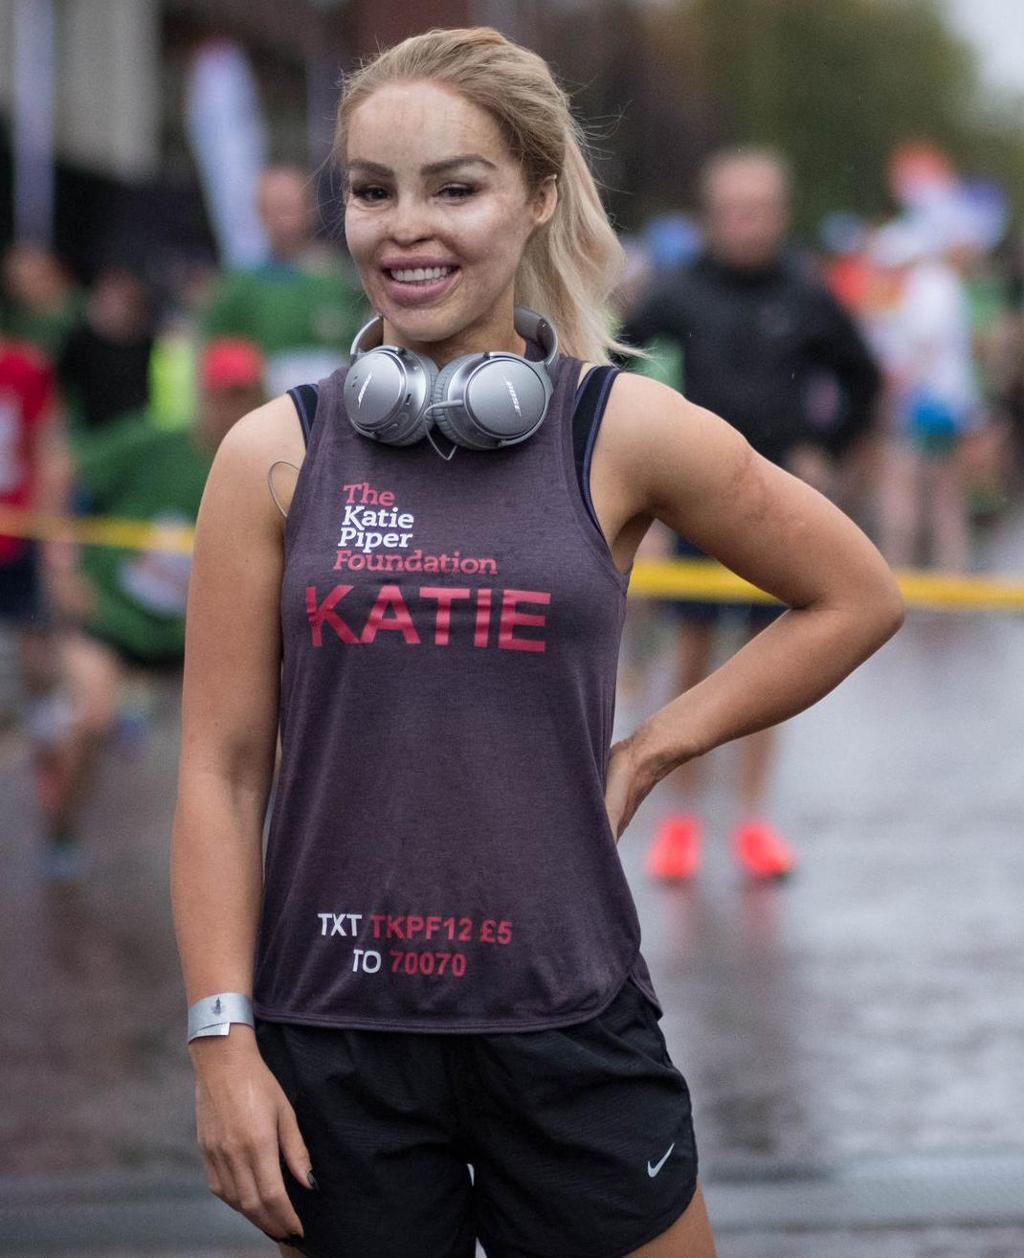 Woman, Katie Piper, in training gear. Behind her is a yellow ribbon accross the road, the background is blurred but we can see runners standing there. Photo.